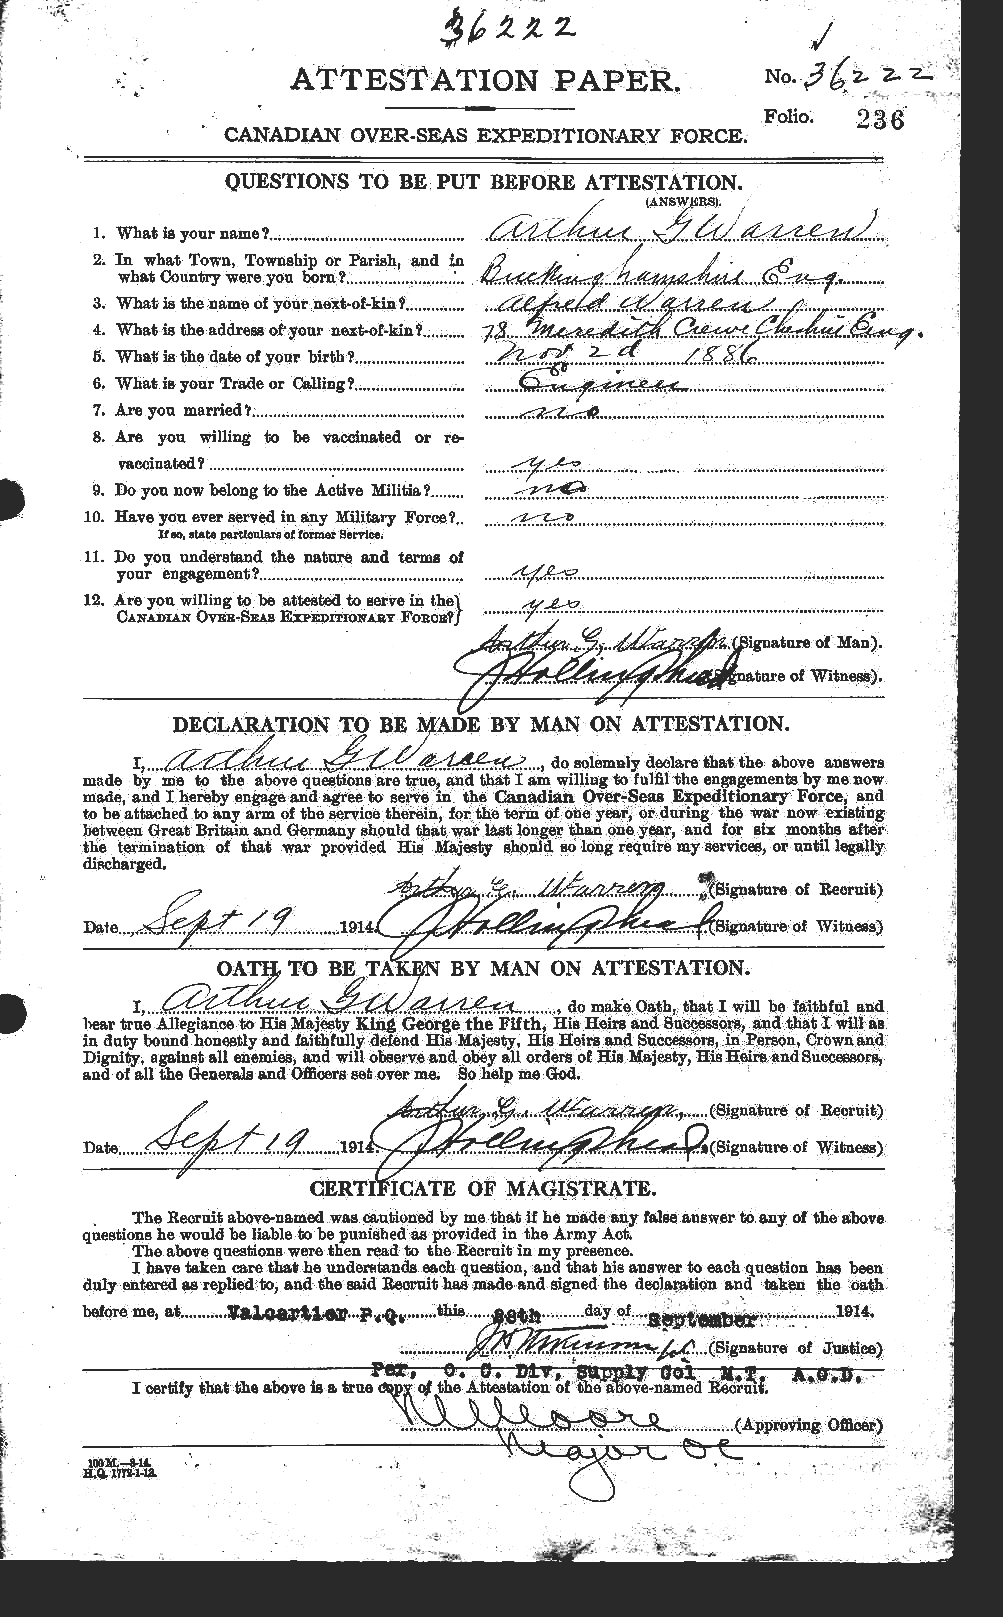 Personnel Records of the First World War - CEF 658361a